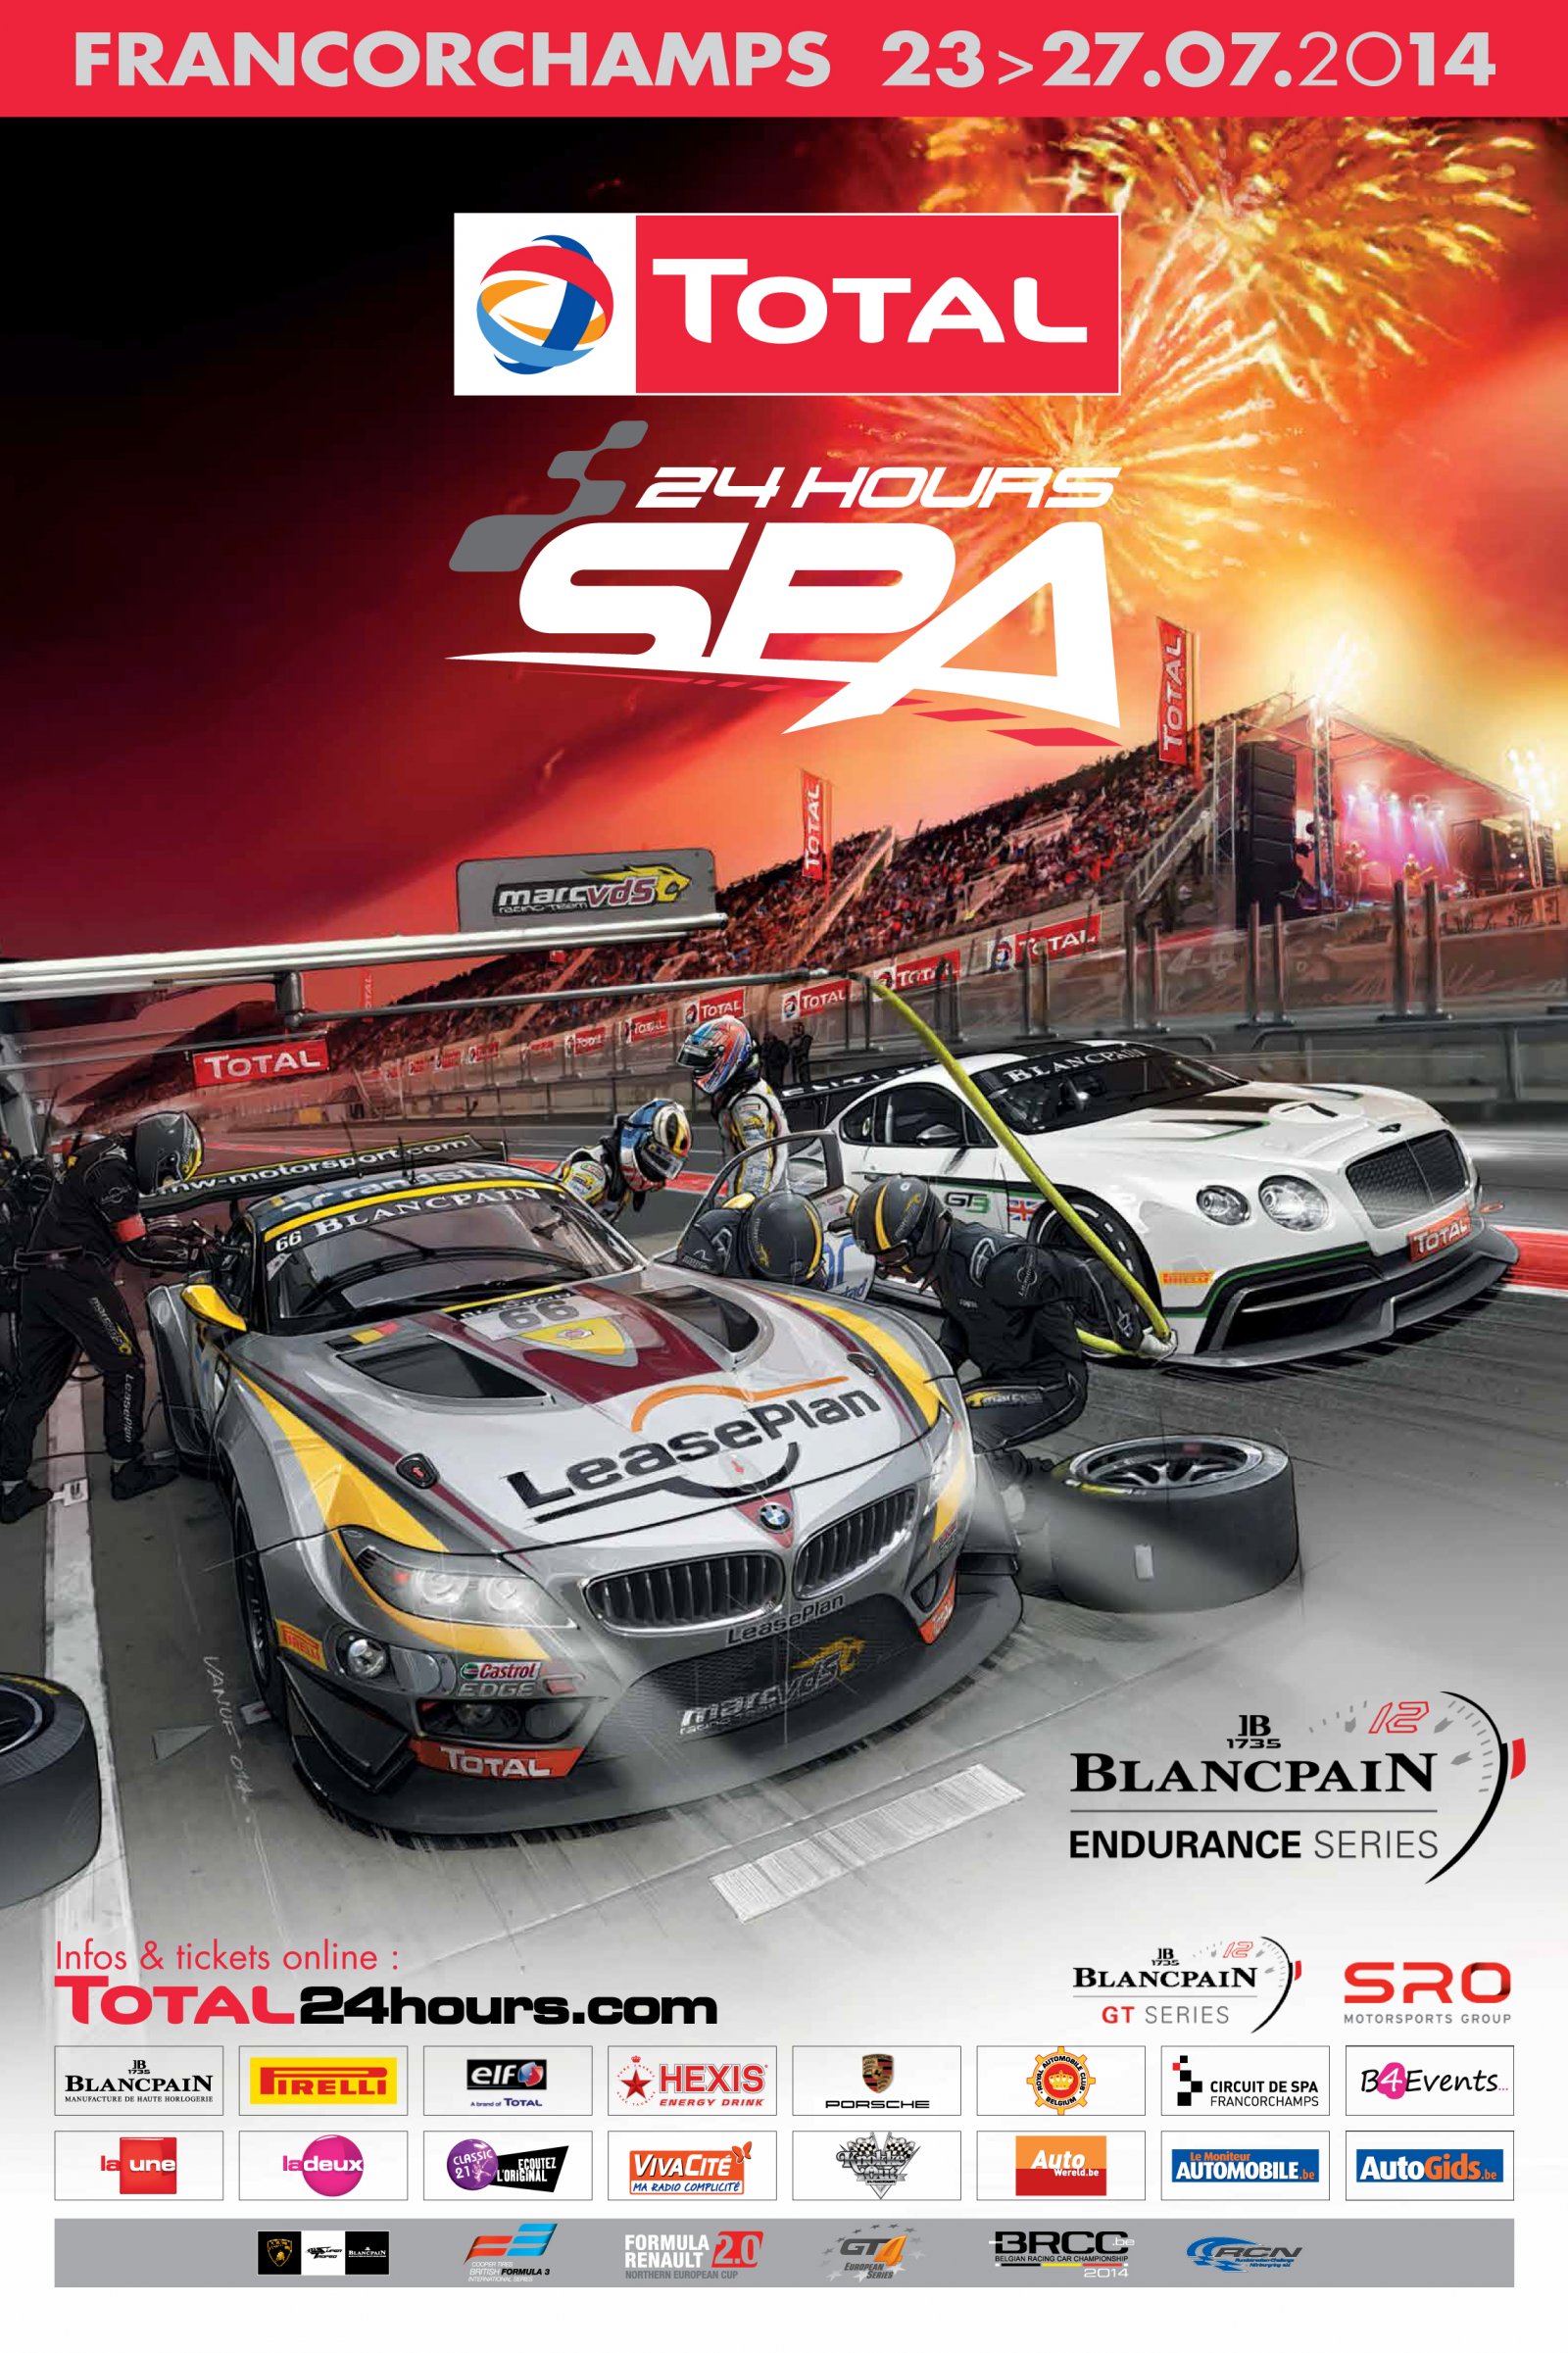 Official poster for the Total 24 Hours of Spa released